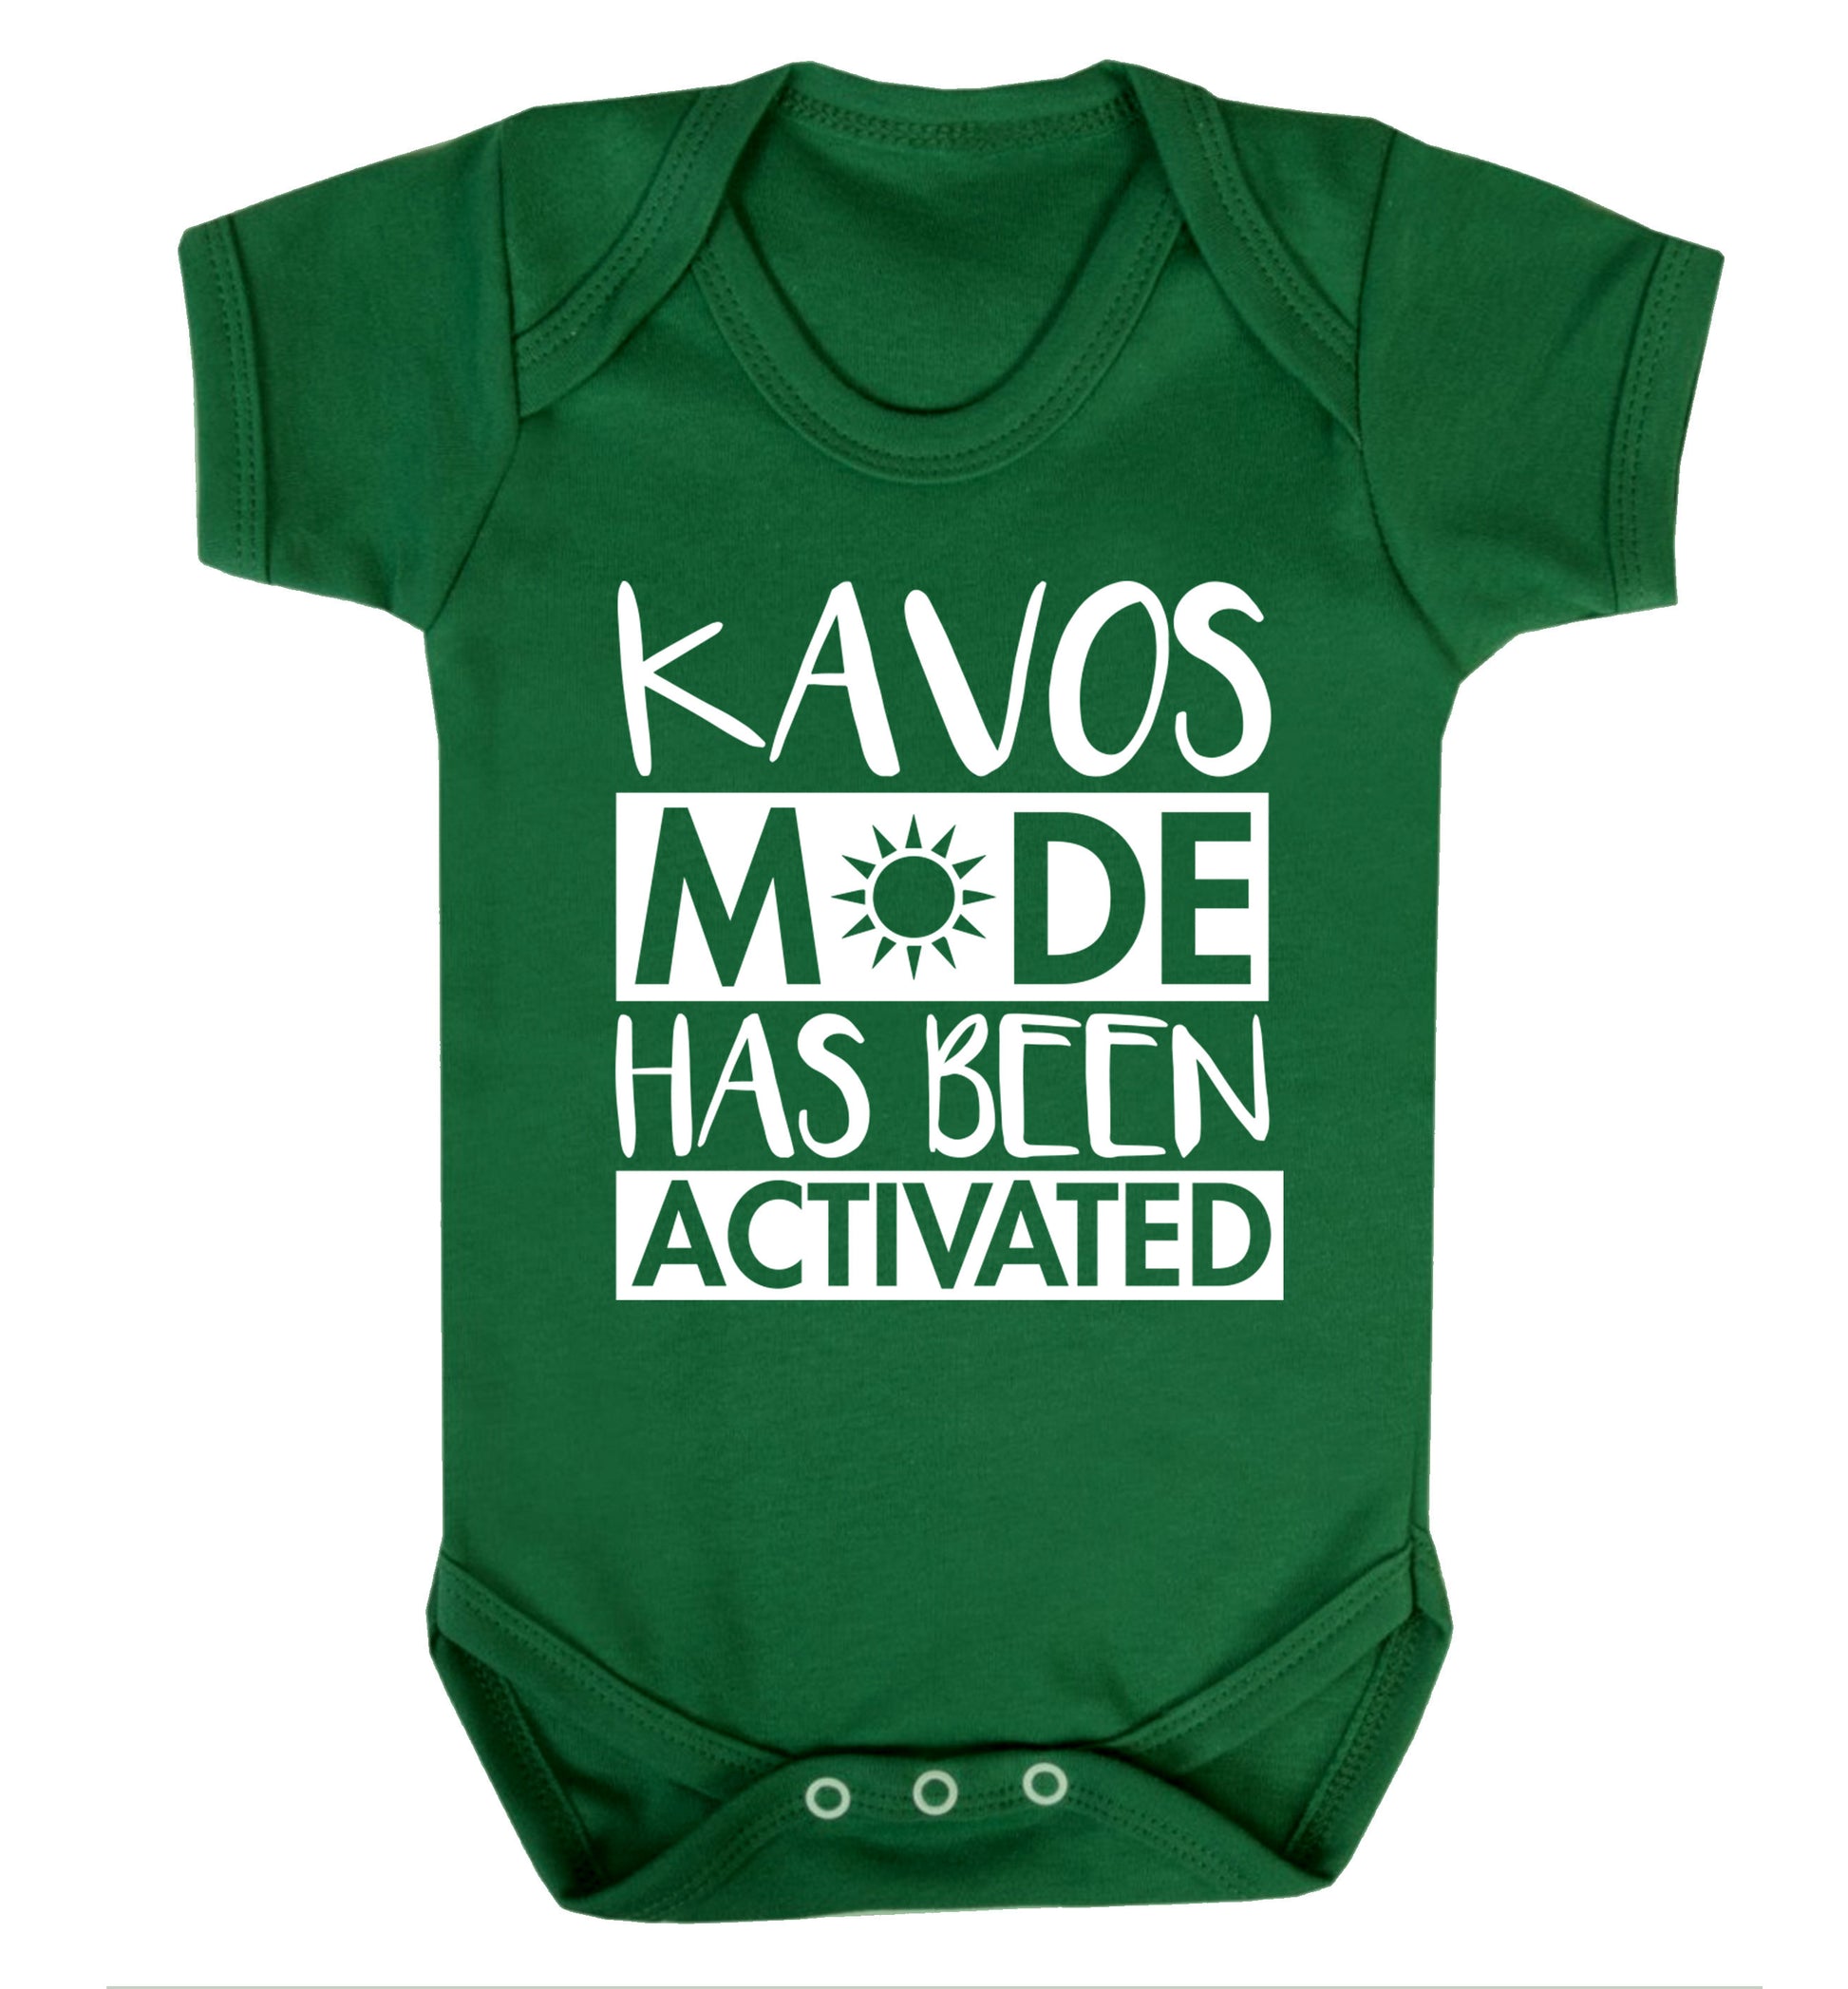 Kavos mode has been activated Baby Vest green 18-24 months